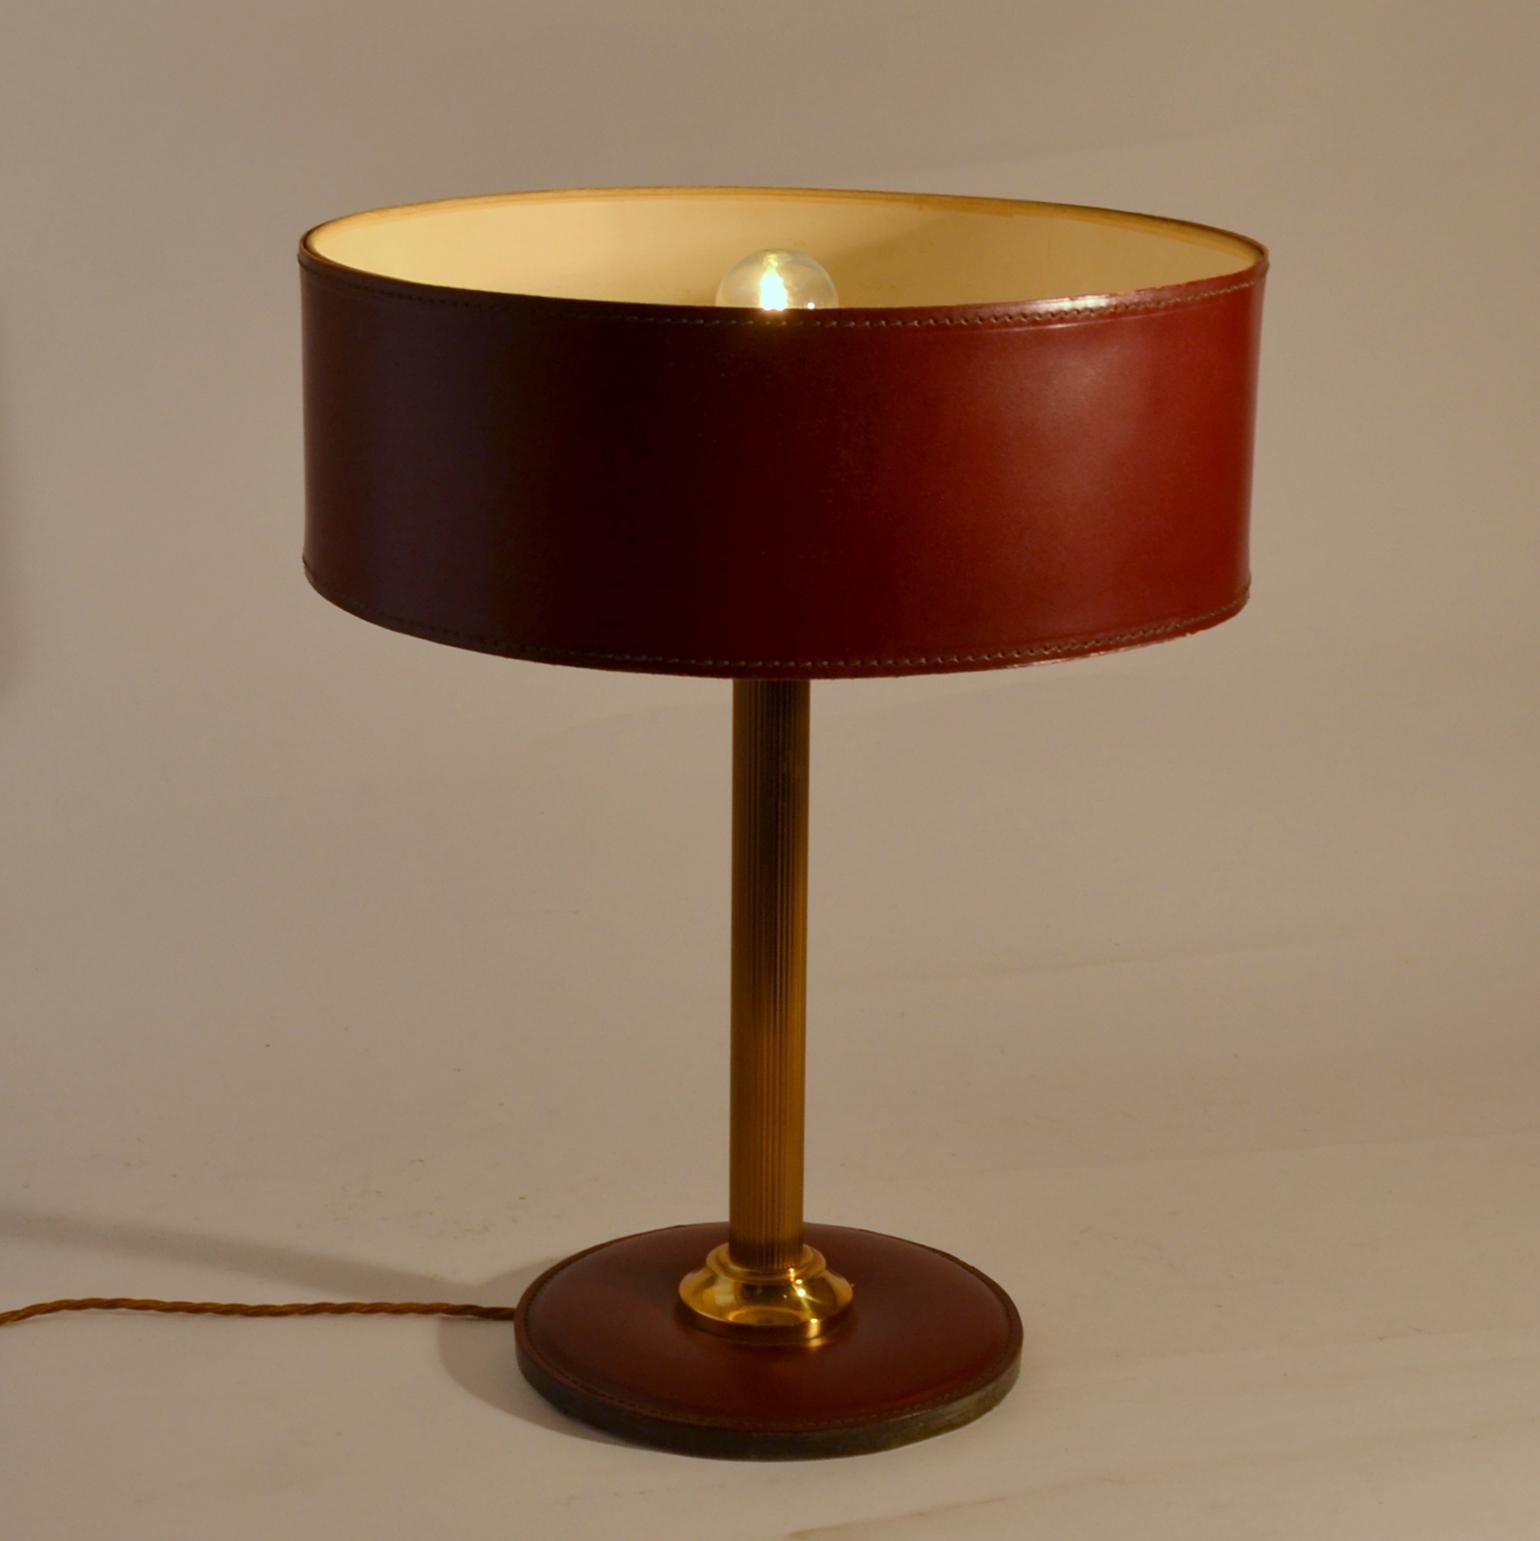 Red brown leather table lamp with a cylinder shade and round base with detailed contrasting stitching standing on a brass stem.
Variations on this model available.